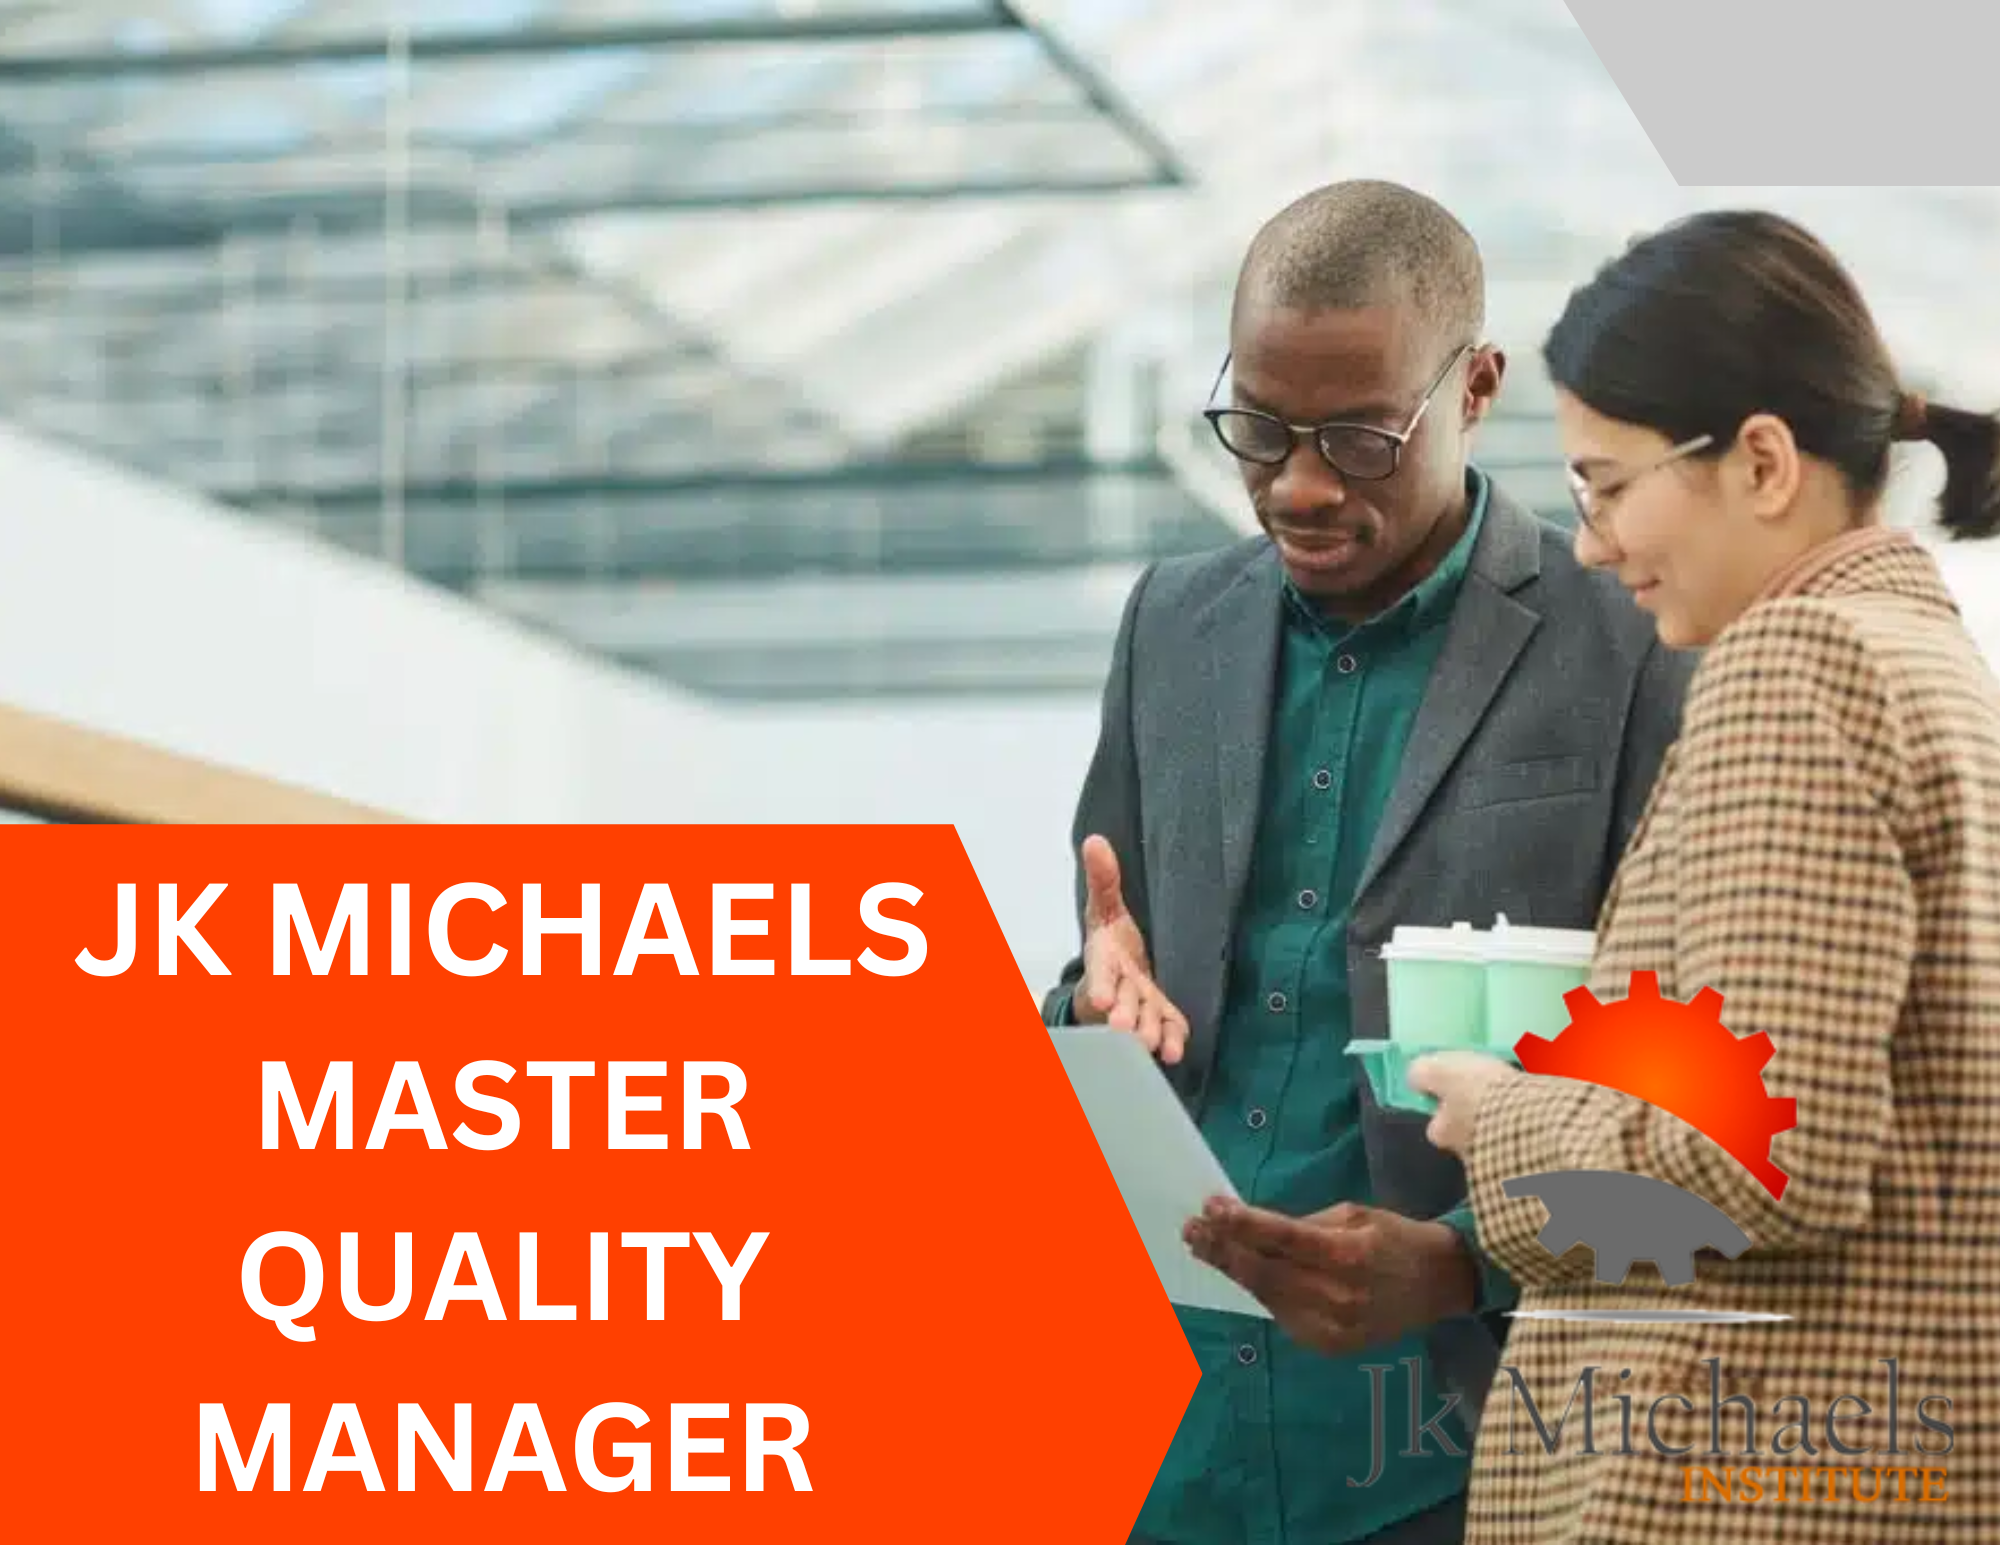 MASTER QUALITY MANAGER